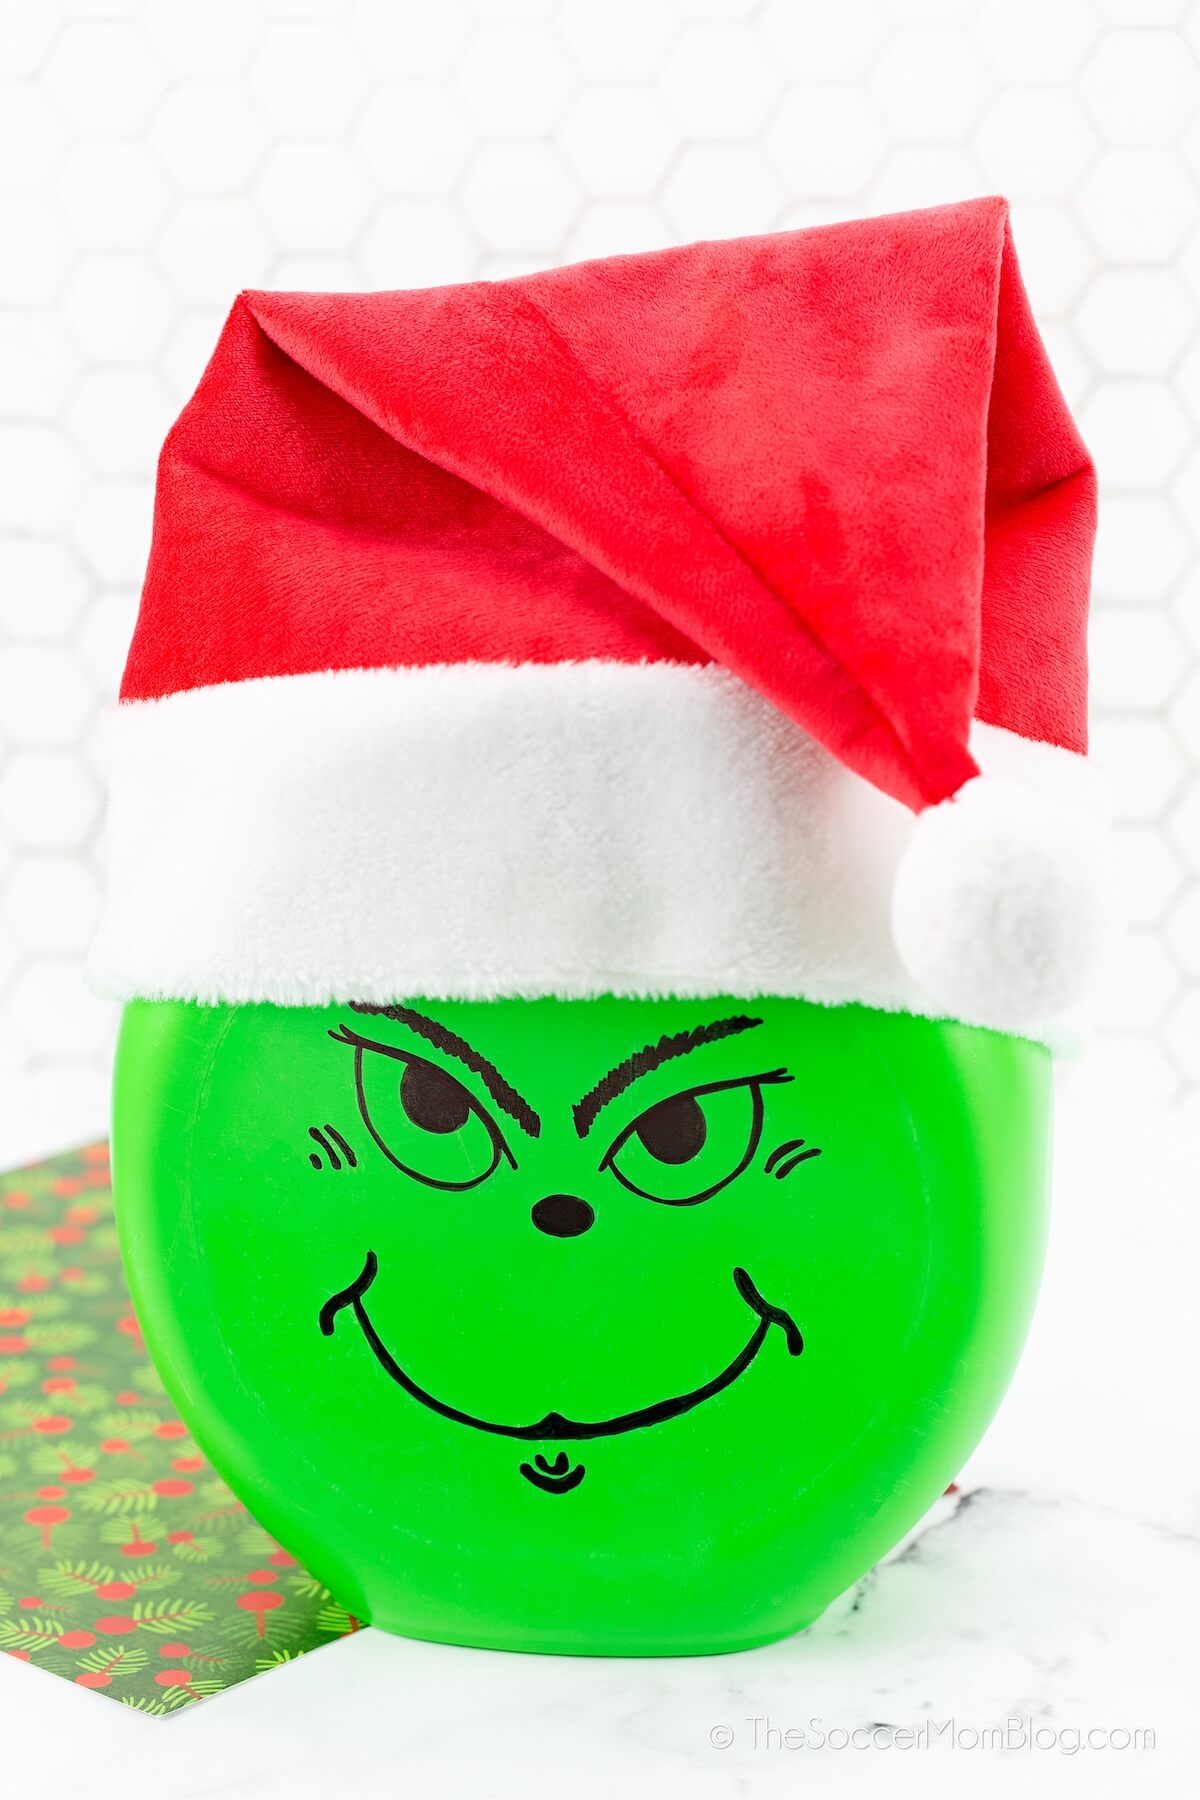 Christmas Lanterns from Laundry Pod Containers - The Soccer Mom Blog